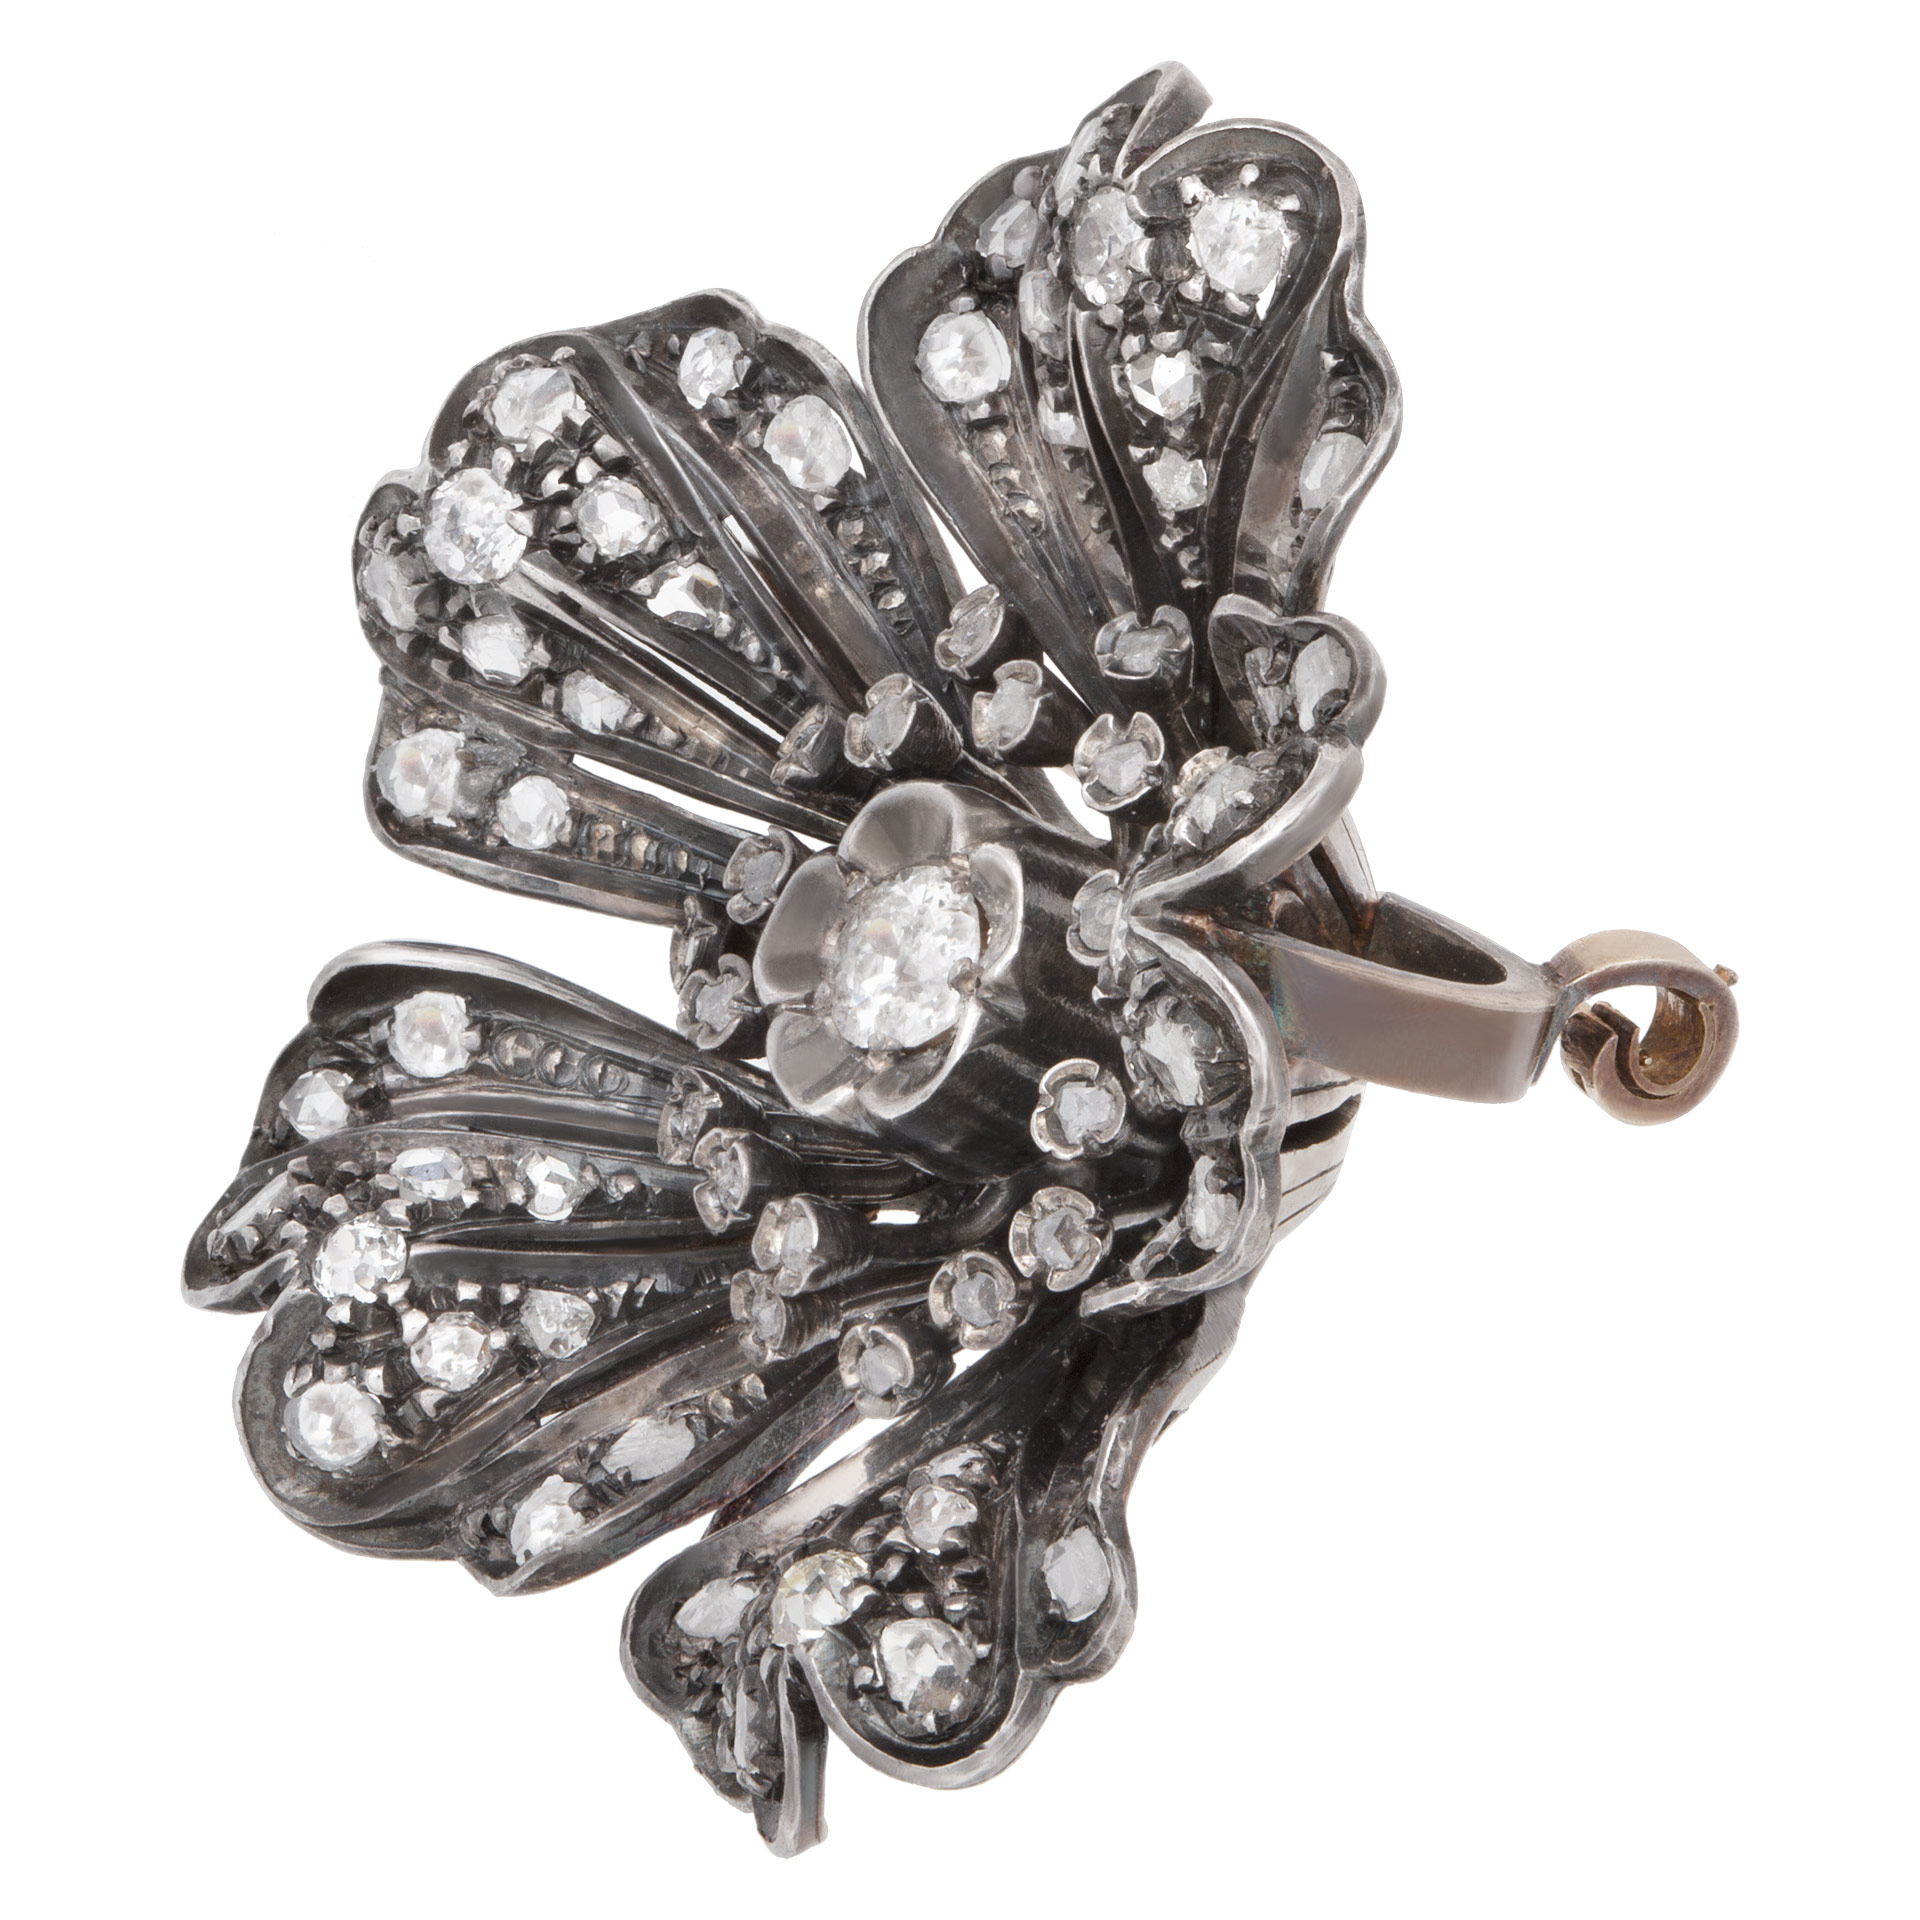 VIcorian brooch, pendant with approx. 2.00 carats old mine cut diamonds, set in sliver top and gold. image 4